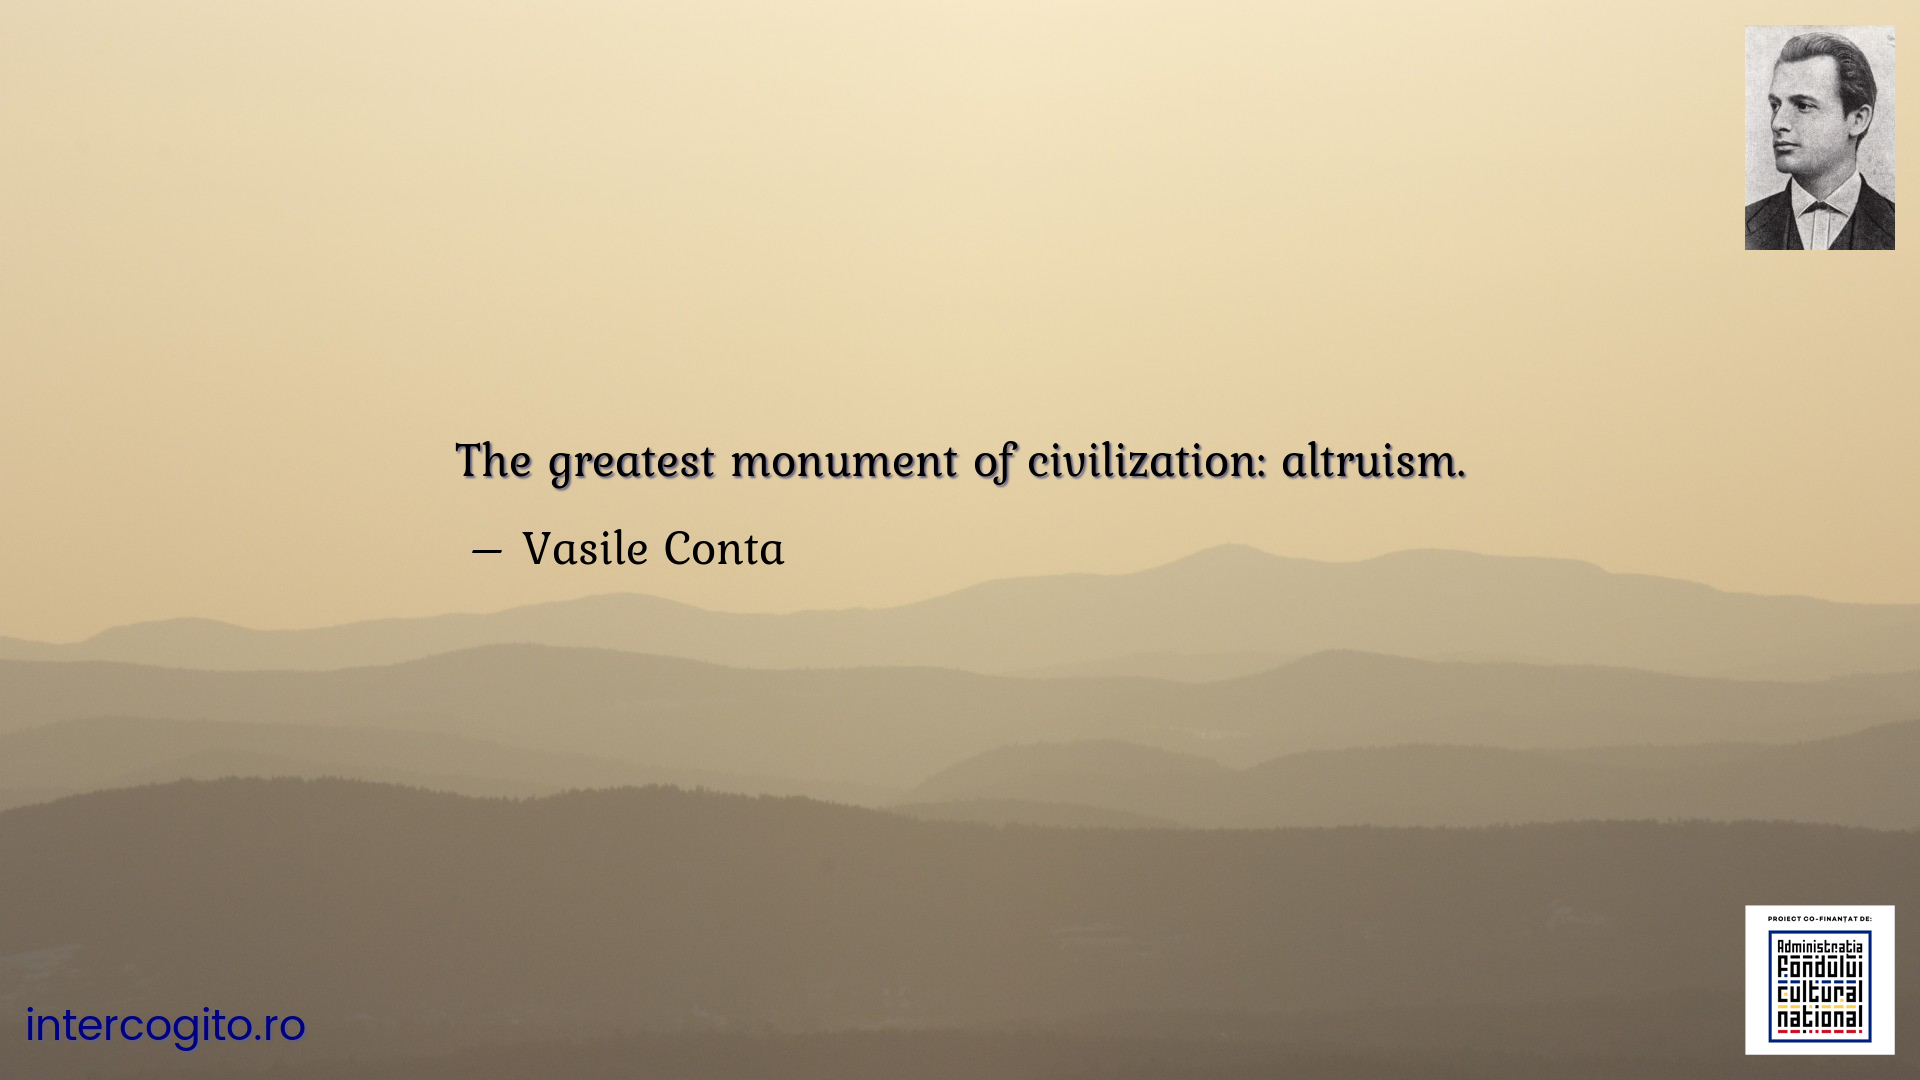 The greatest monument of civilization: altruism.